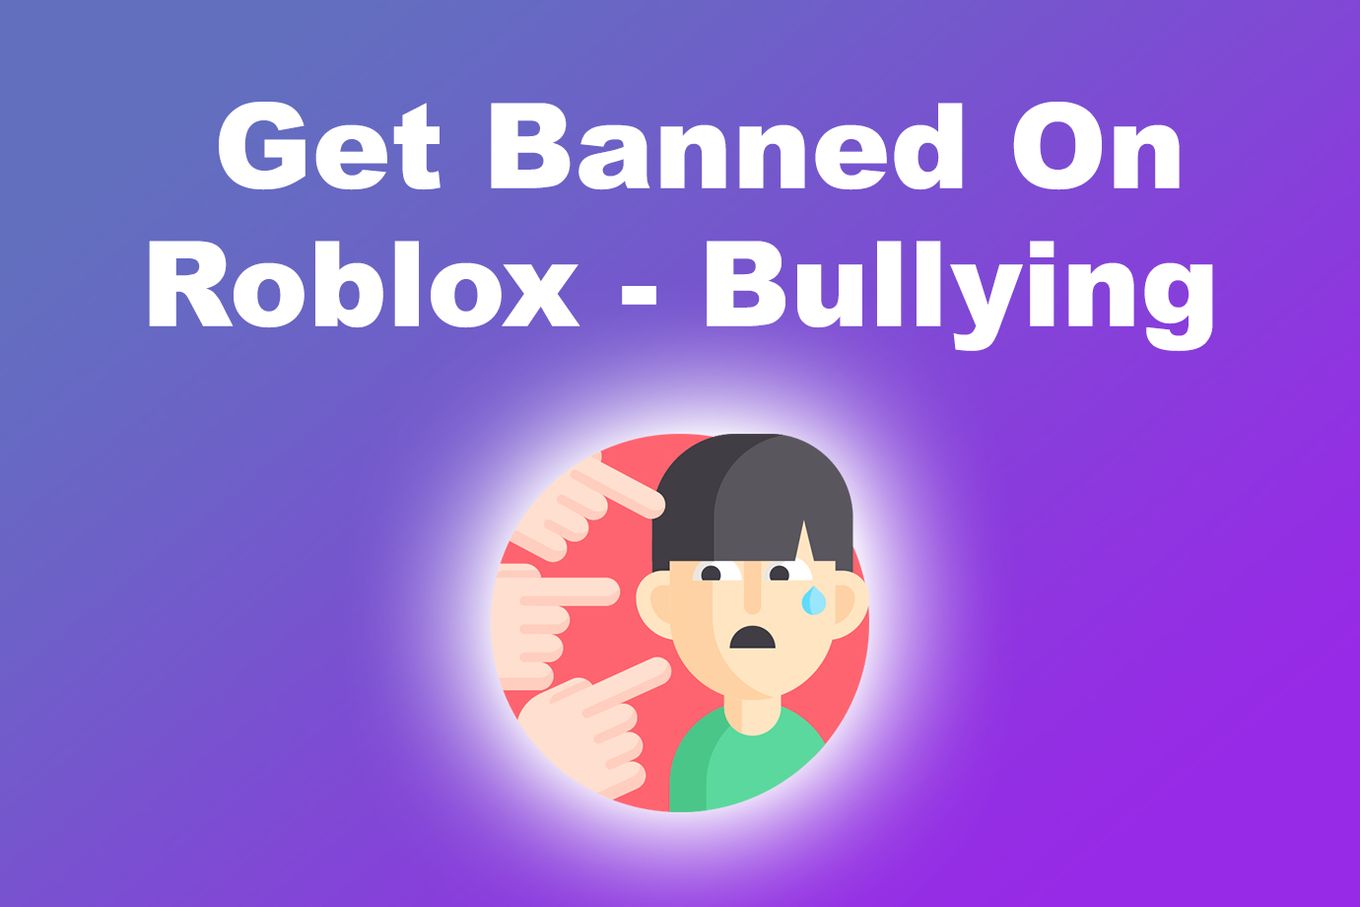 Bullying - Get Banned On Roblox